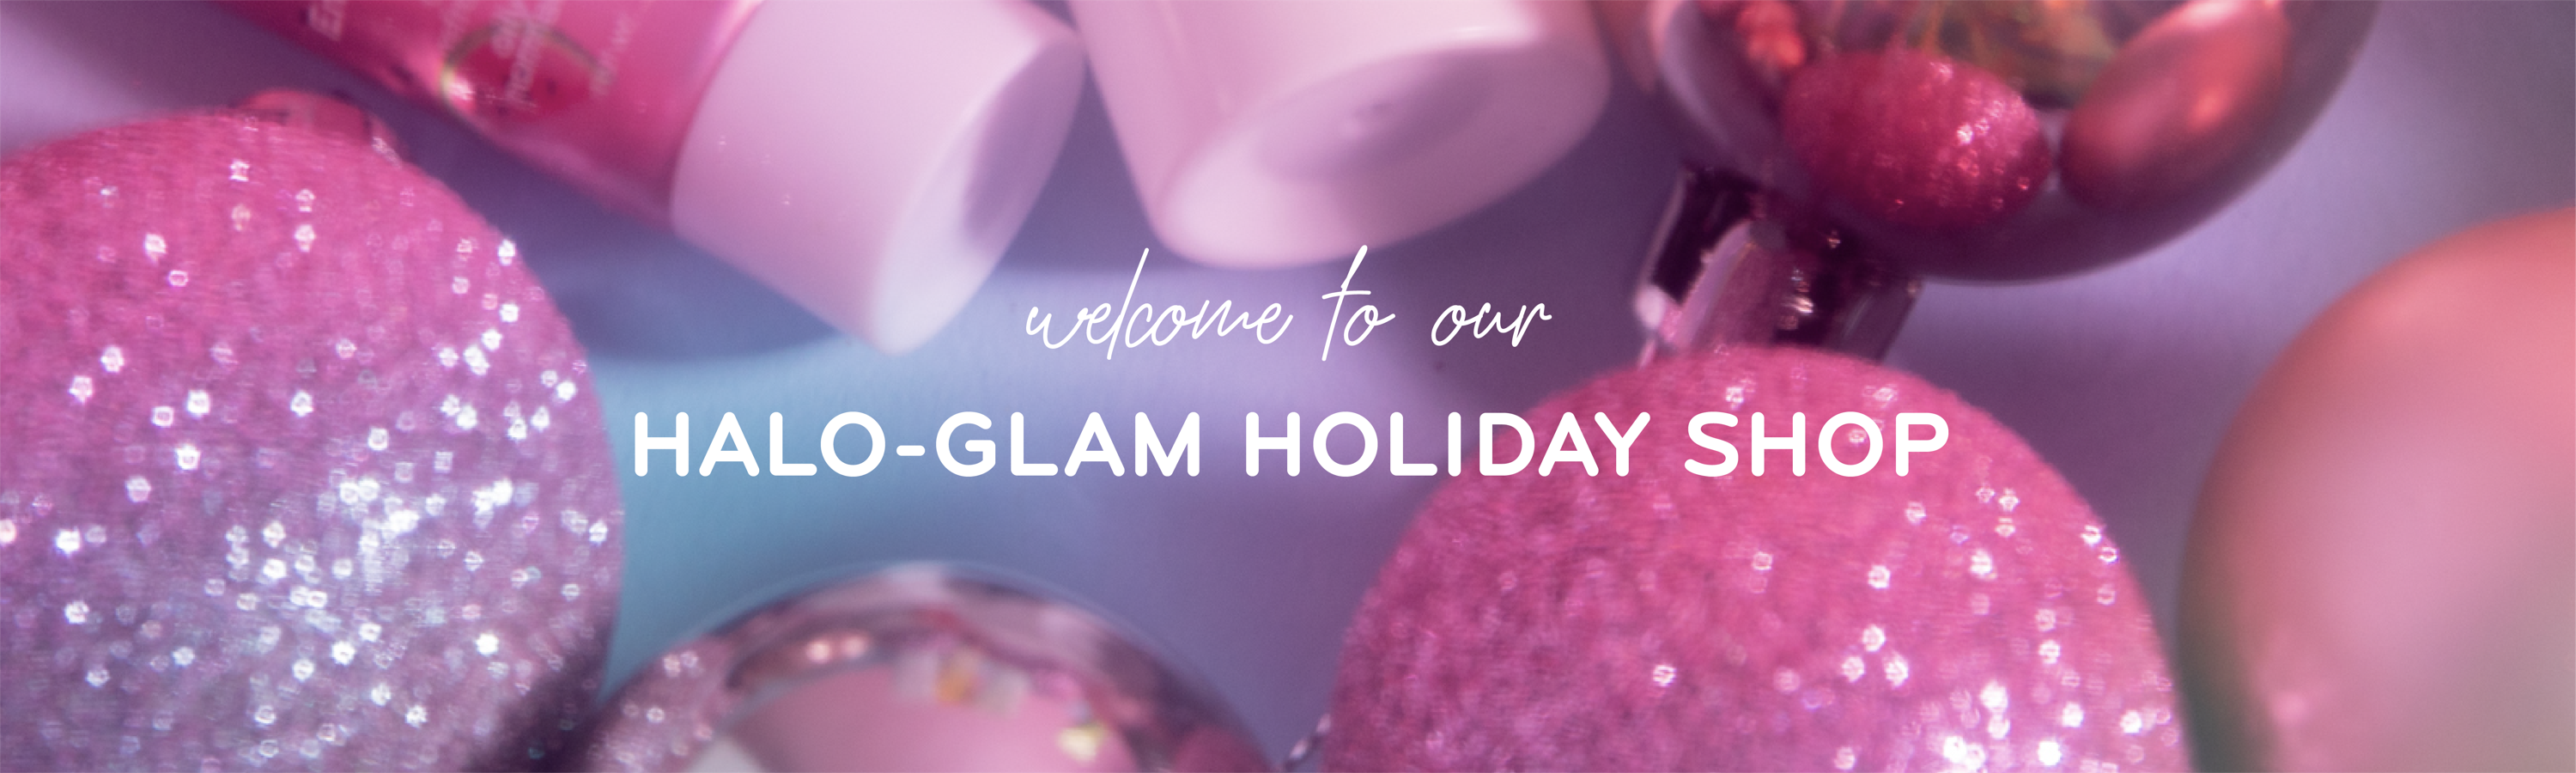 Welcome to our Halo-Glam Holiday Shop